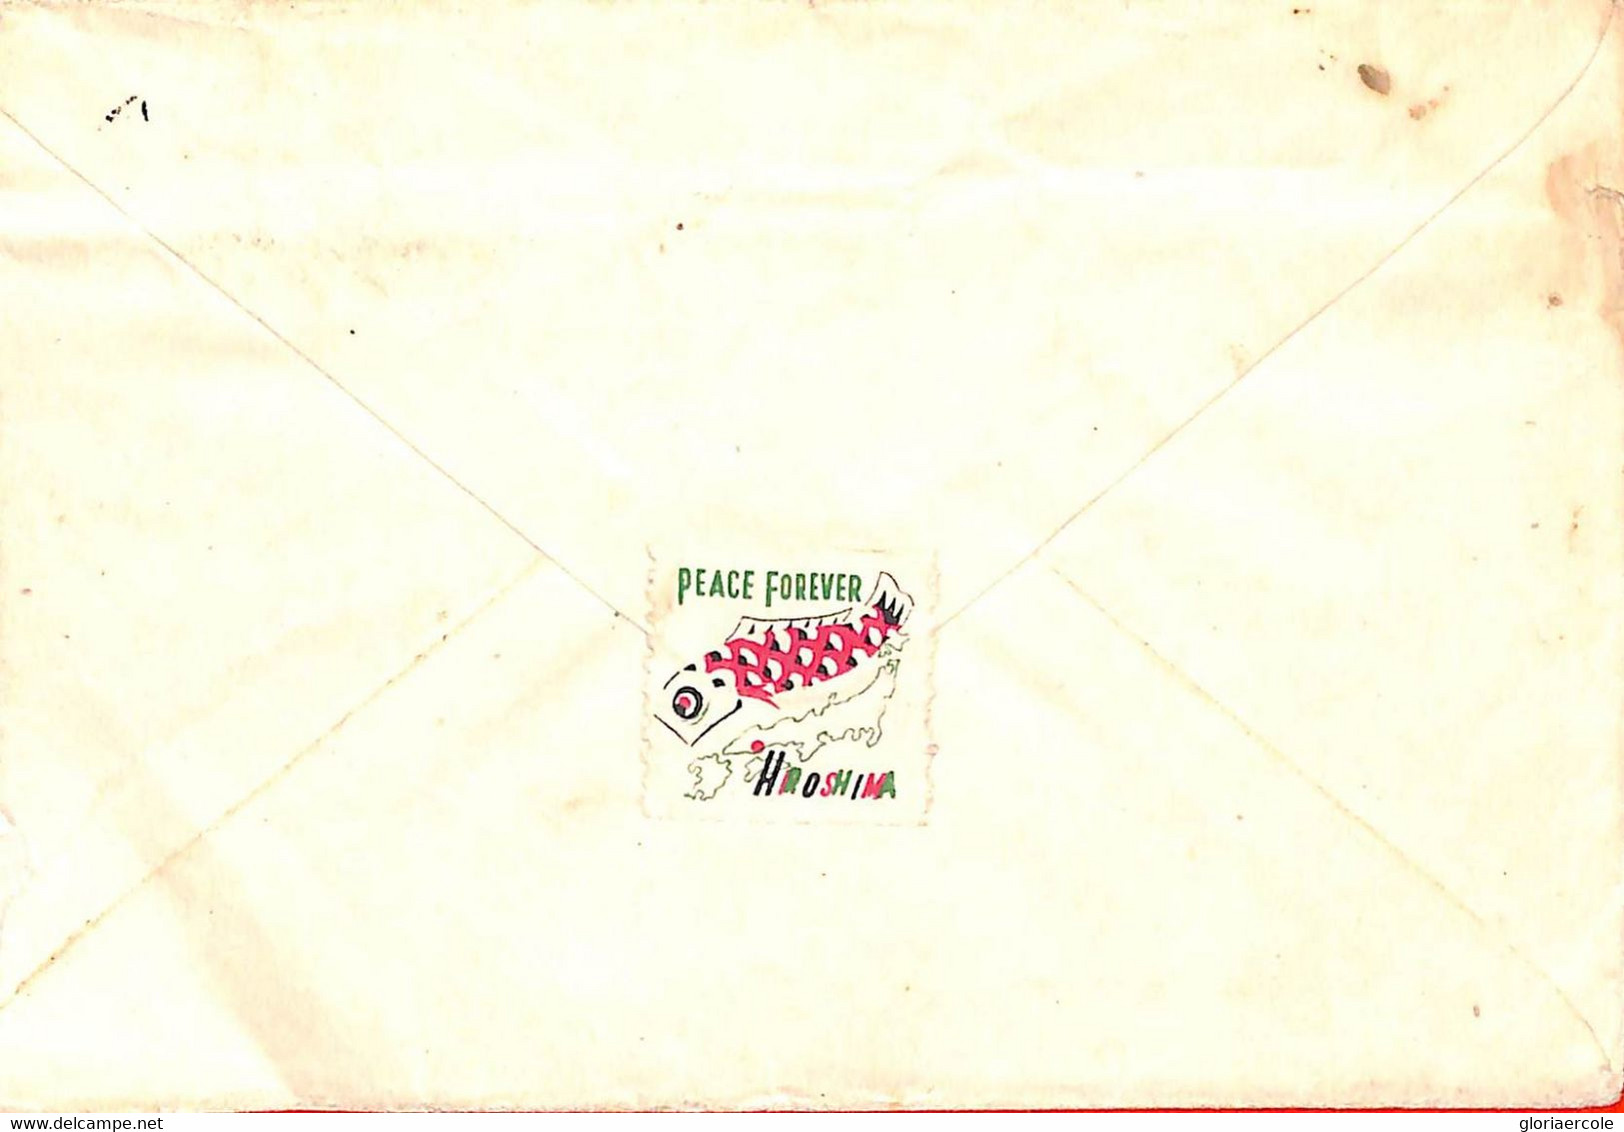 Aa6899 - JAPAN - POSTAL HISTORY -  COVER To The USA  1951 - BIRDS Agricolture - Covers & Documents